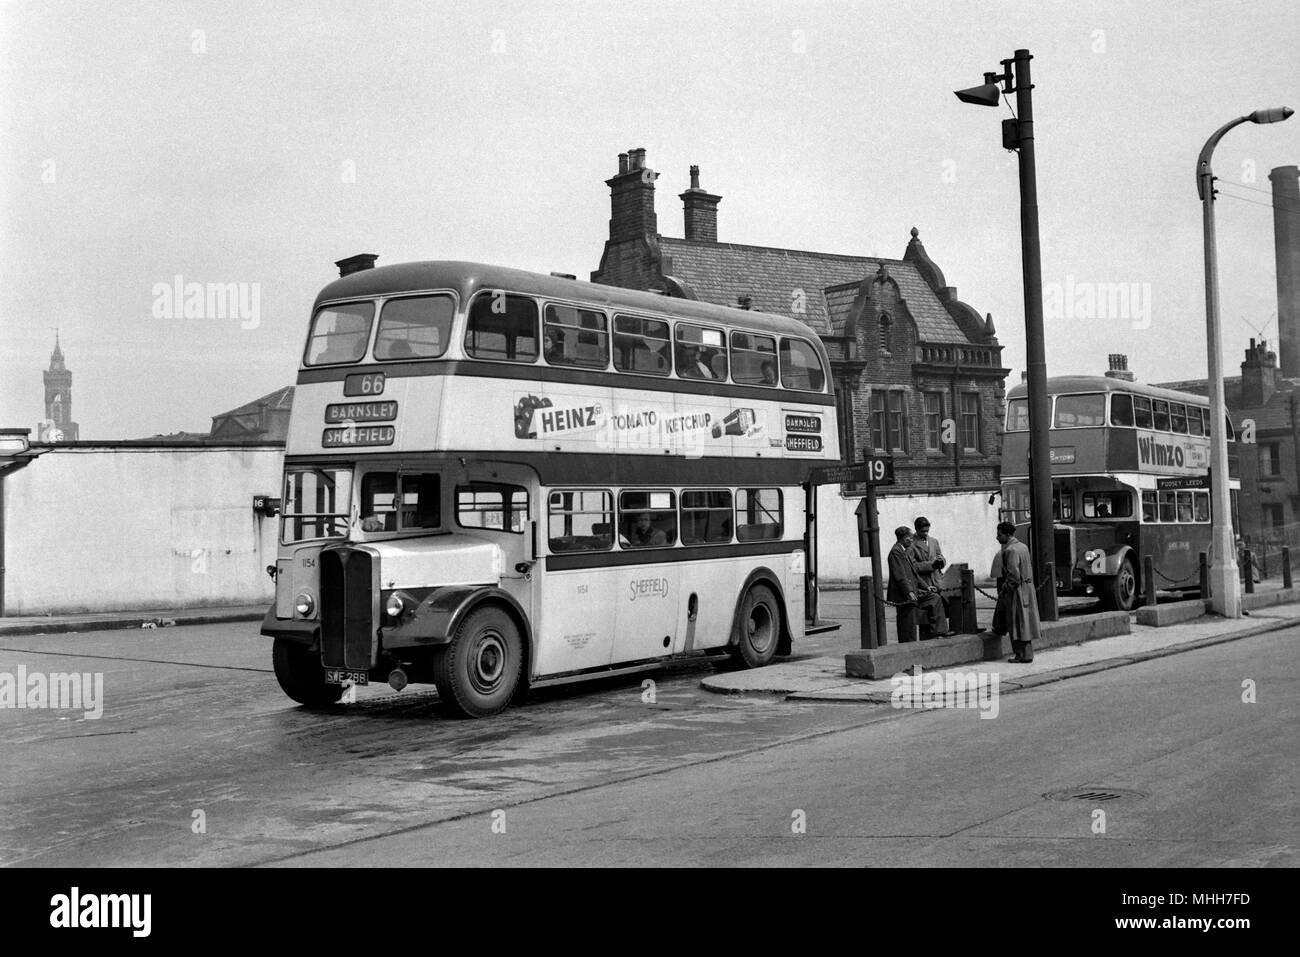 A small group of Asian men wait a bus in Sheffield, South Yorkshire. They could possibly be first generation immigrants seeking a better life 1960 Stock Photo